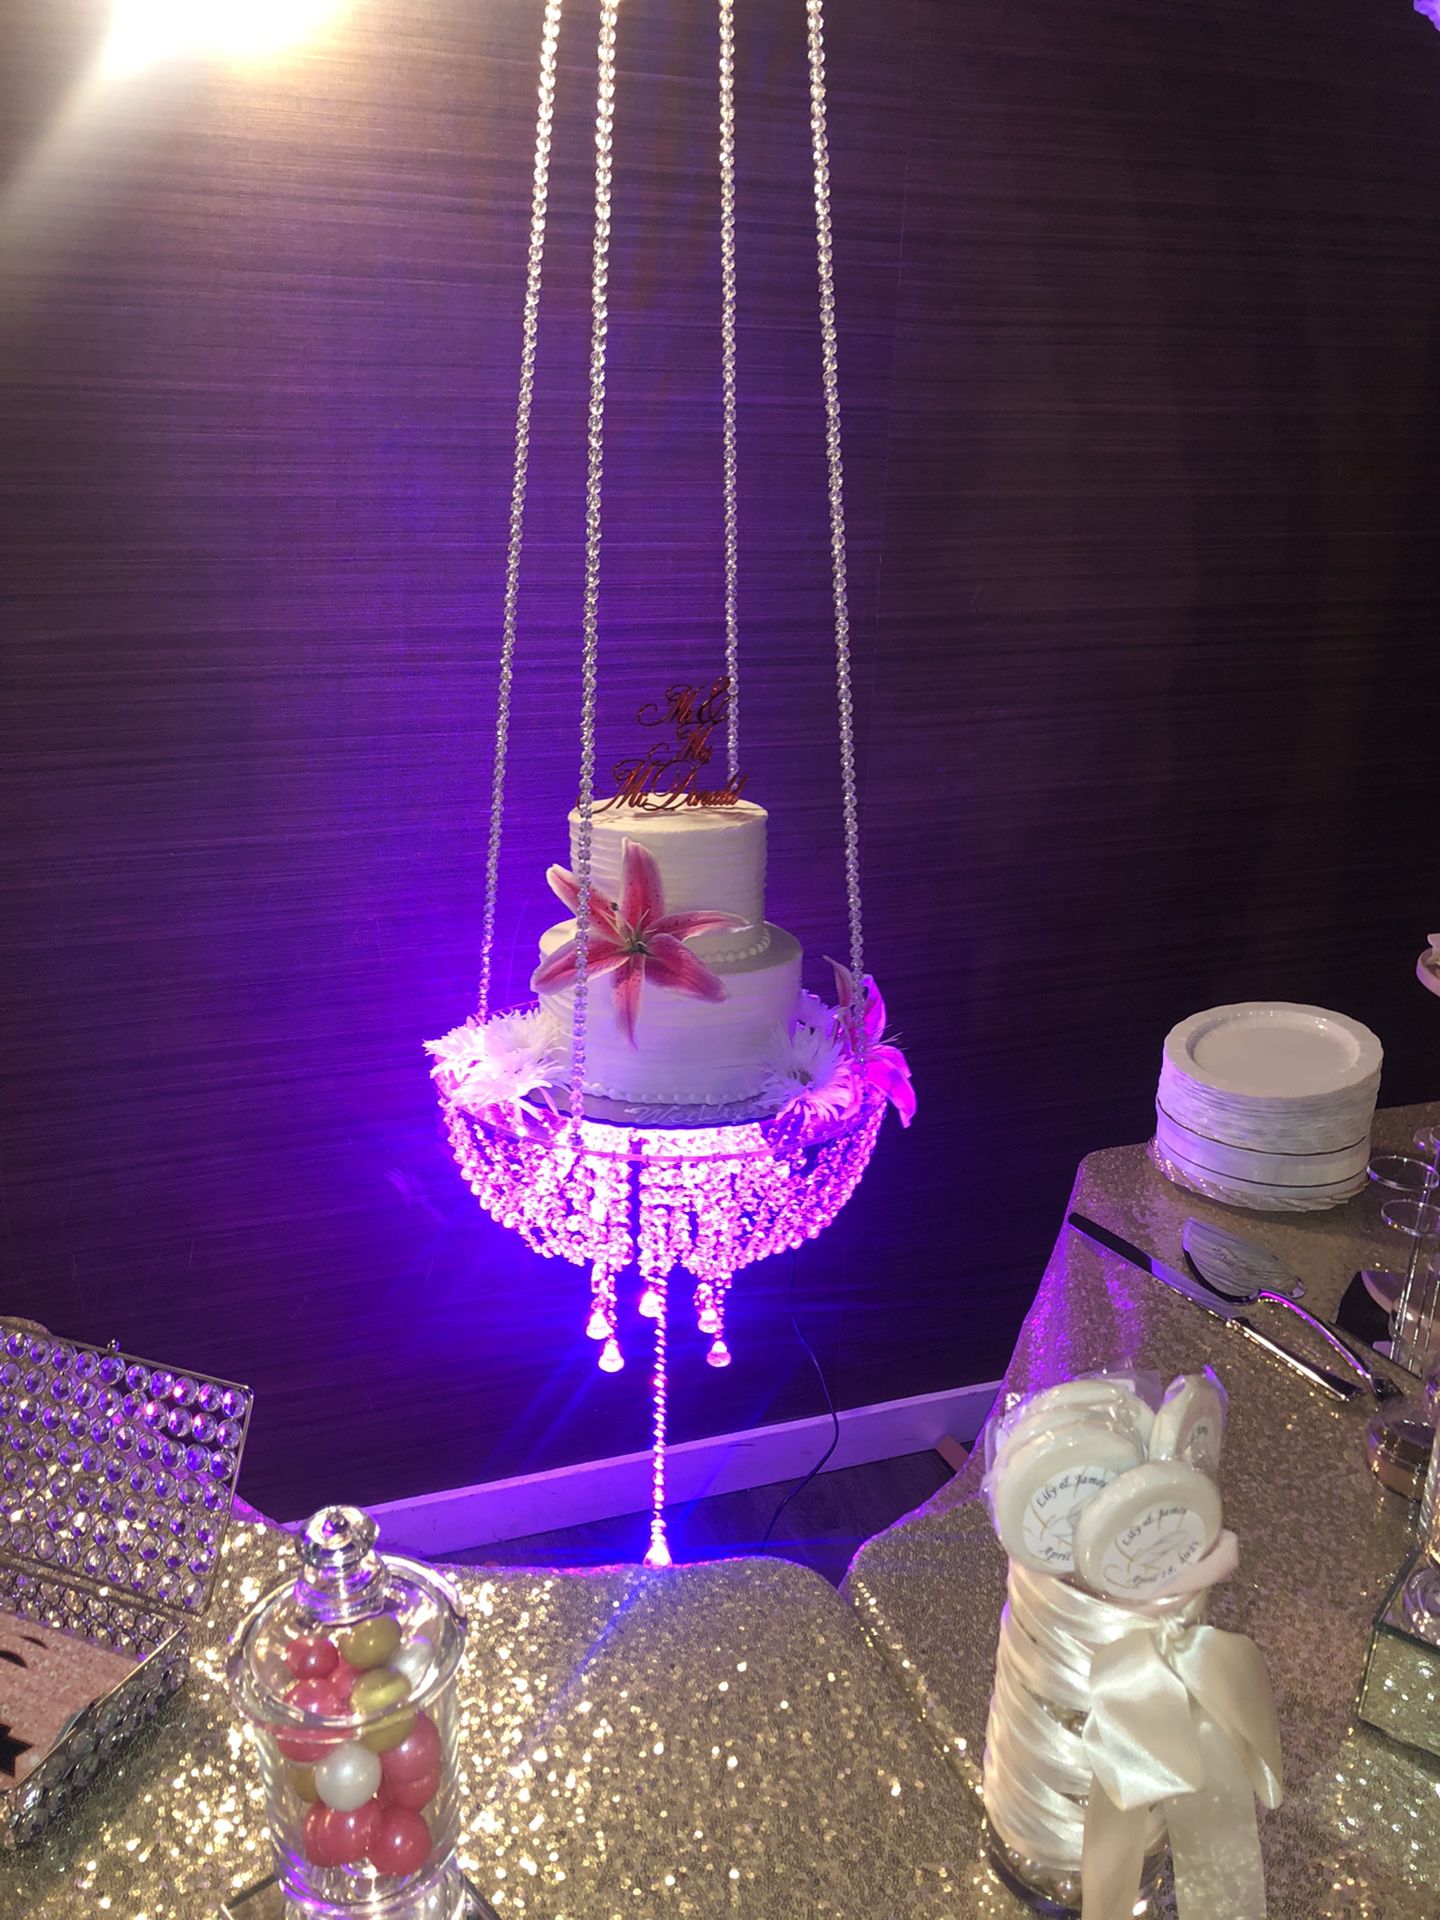 Cake Swing With Floral Decor